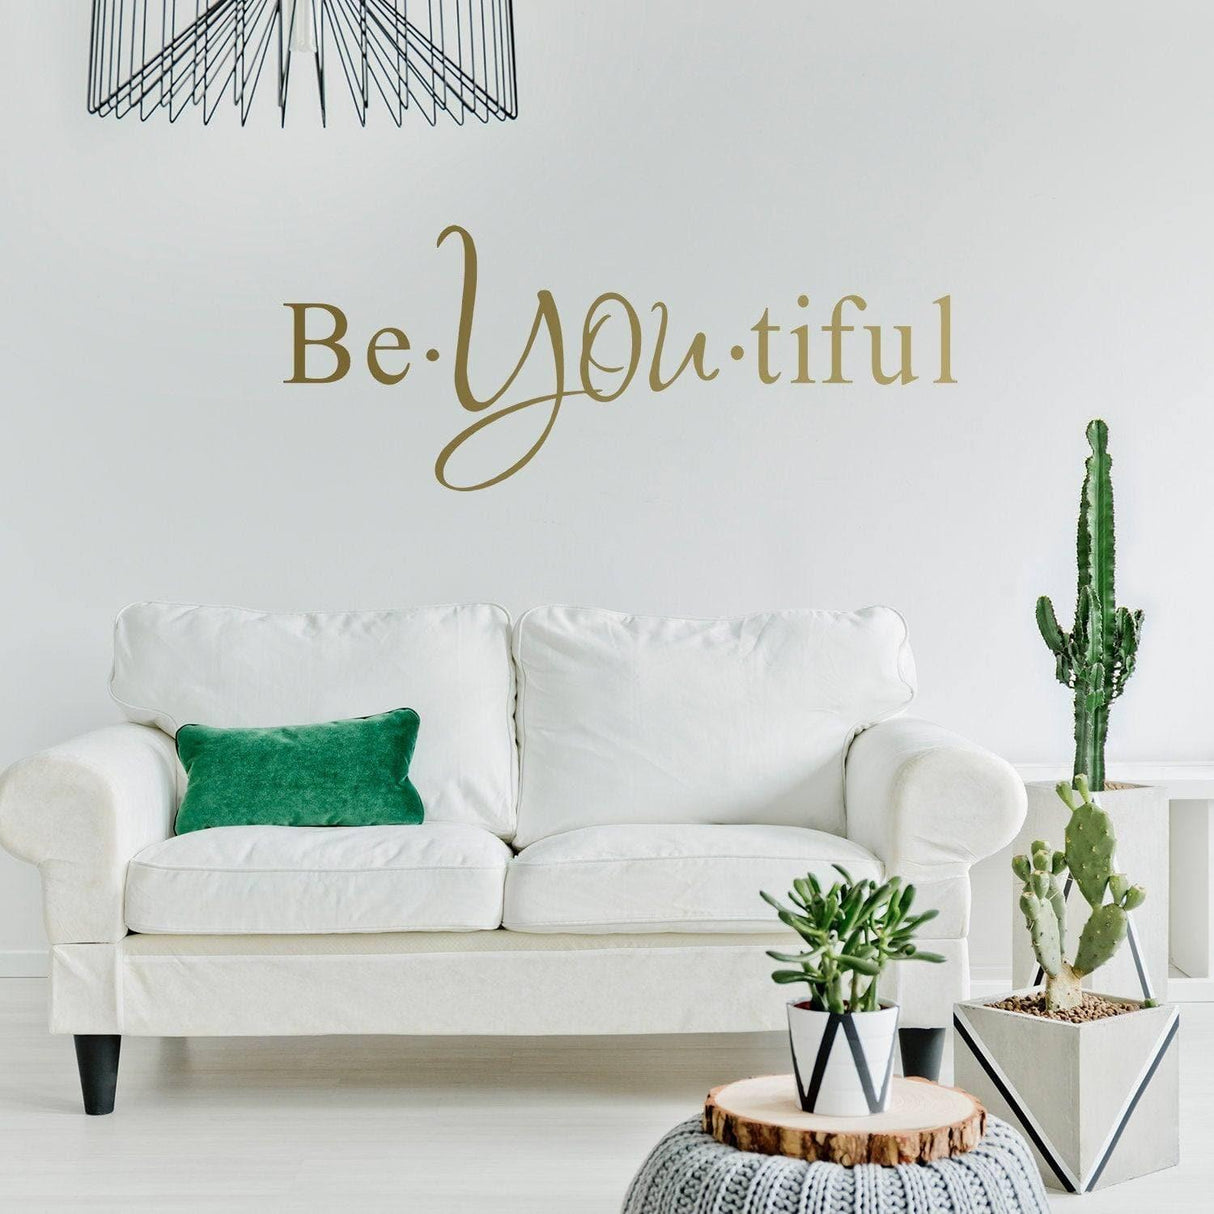 Beautiful Quote Wall Sticker - Be You Own Kind Of Tiful Beyoutiful Art Vinyl Decal - Your Motivational Inspiring Positive Girl Sign Word - Decords